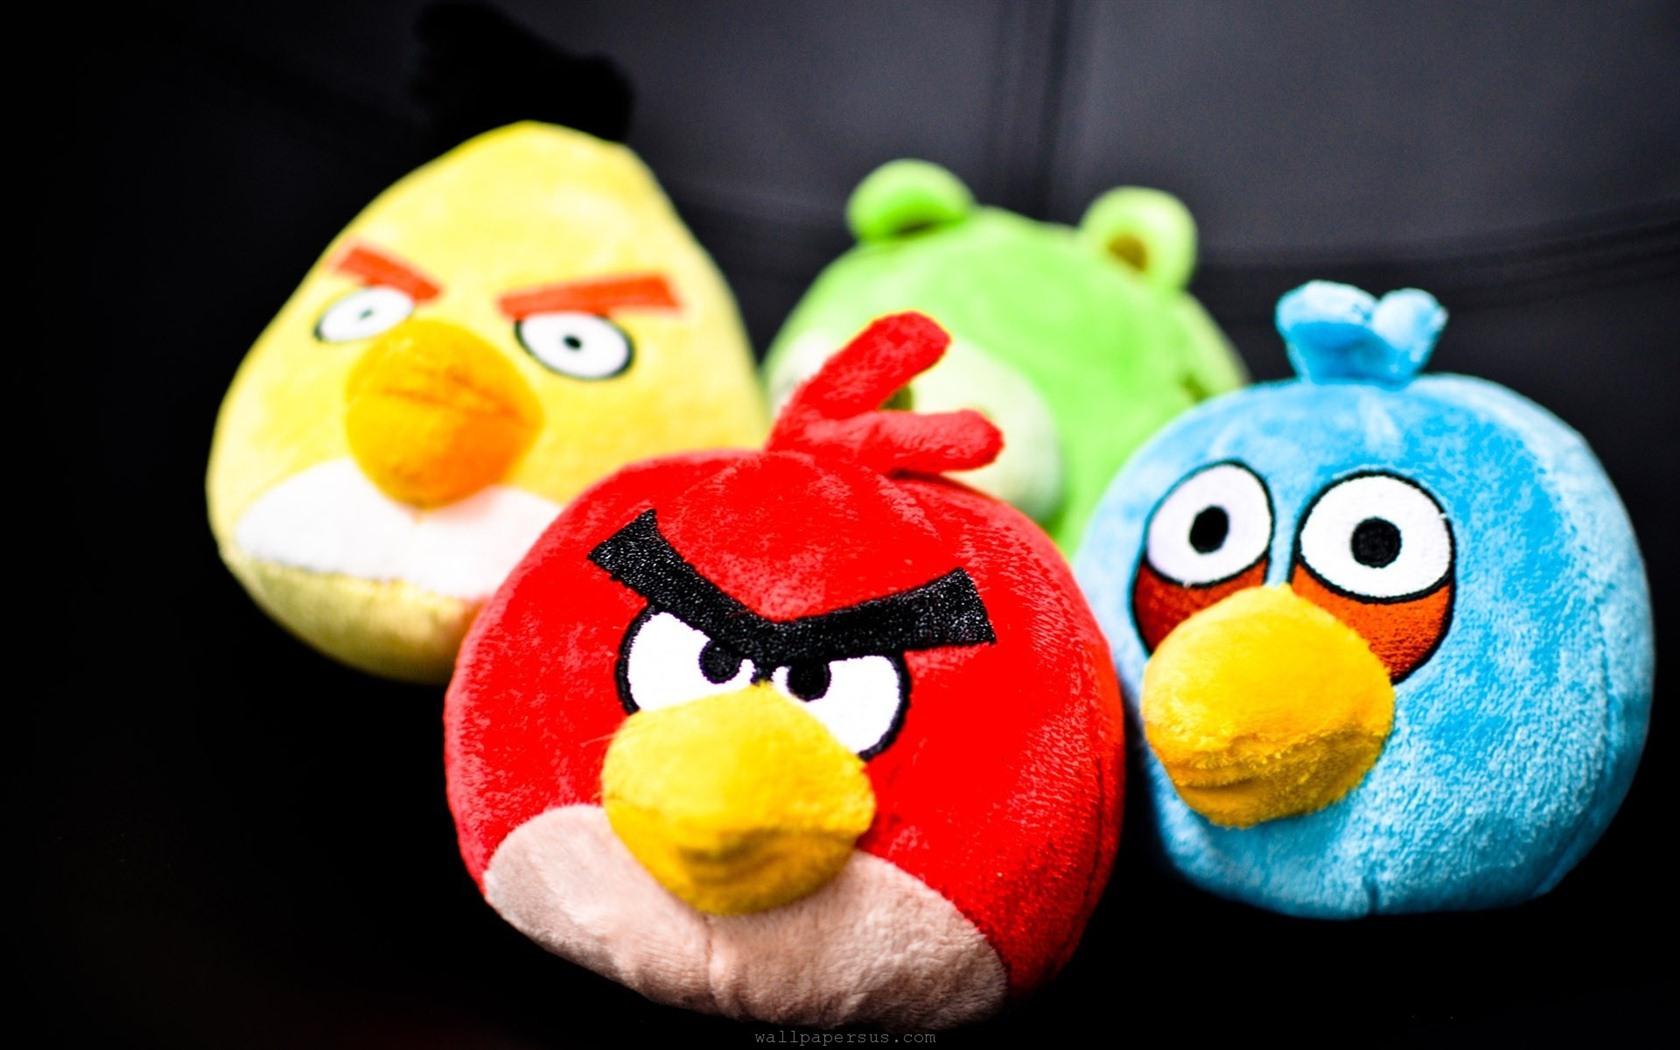 Angry Birds Game Wallpapers #16 - 1680x1050